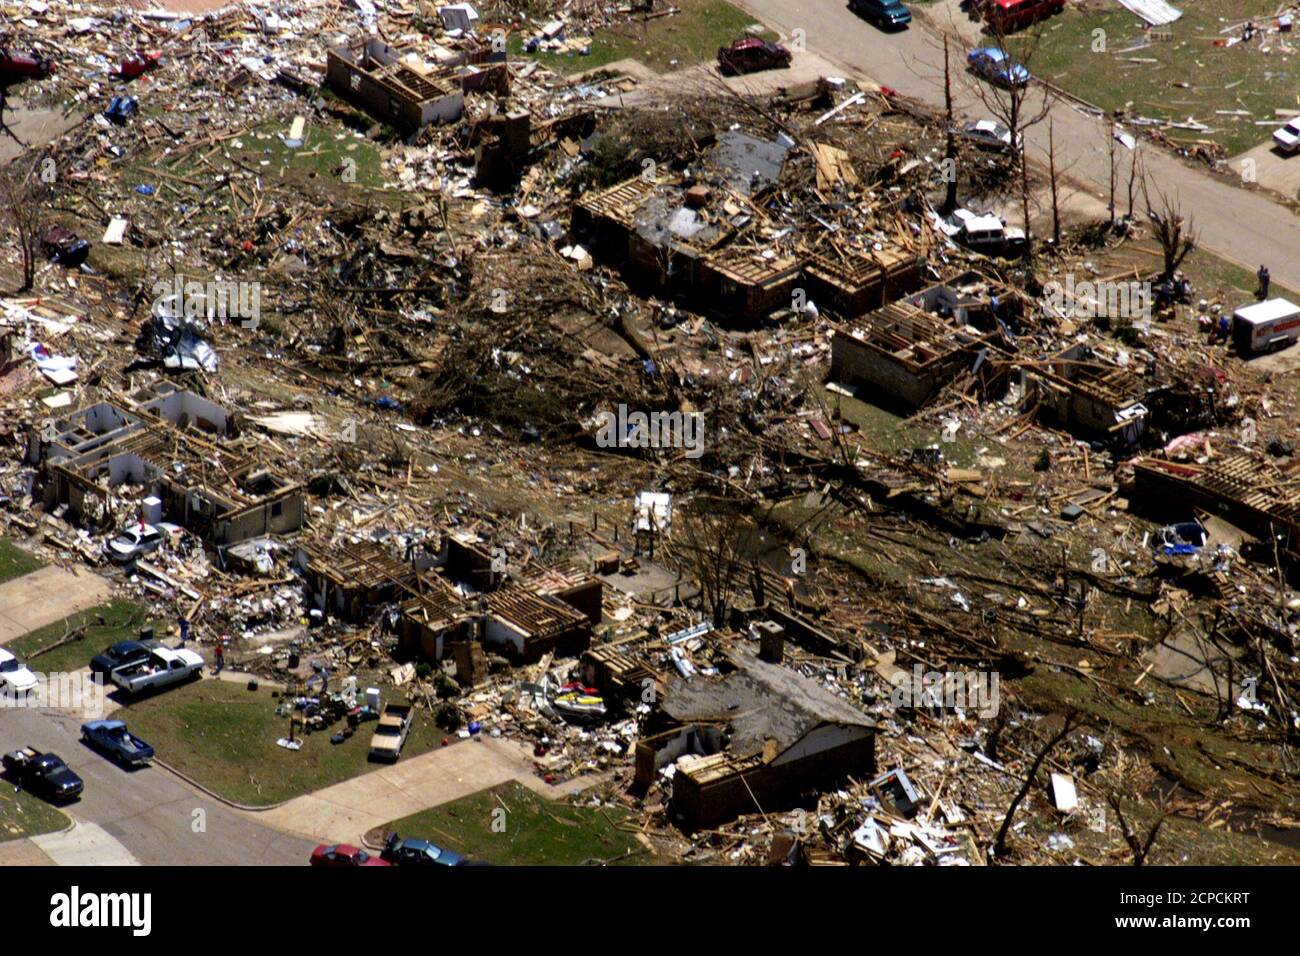 An Aerial View Shows Tornado Damage In An Area Of Moore Oklahoma May 5 Officials Are Estimating That Between 00 To 3000 Homes Were Damaged Or Destroyed In The Tornados Which Hit